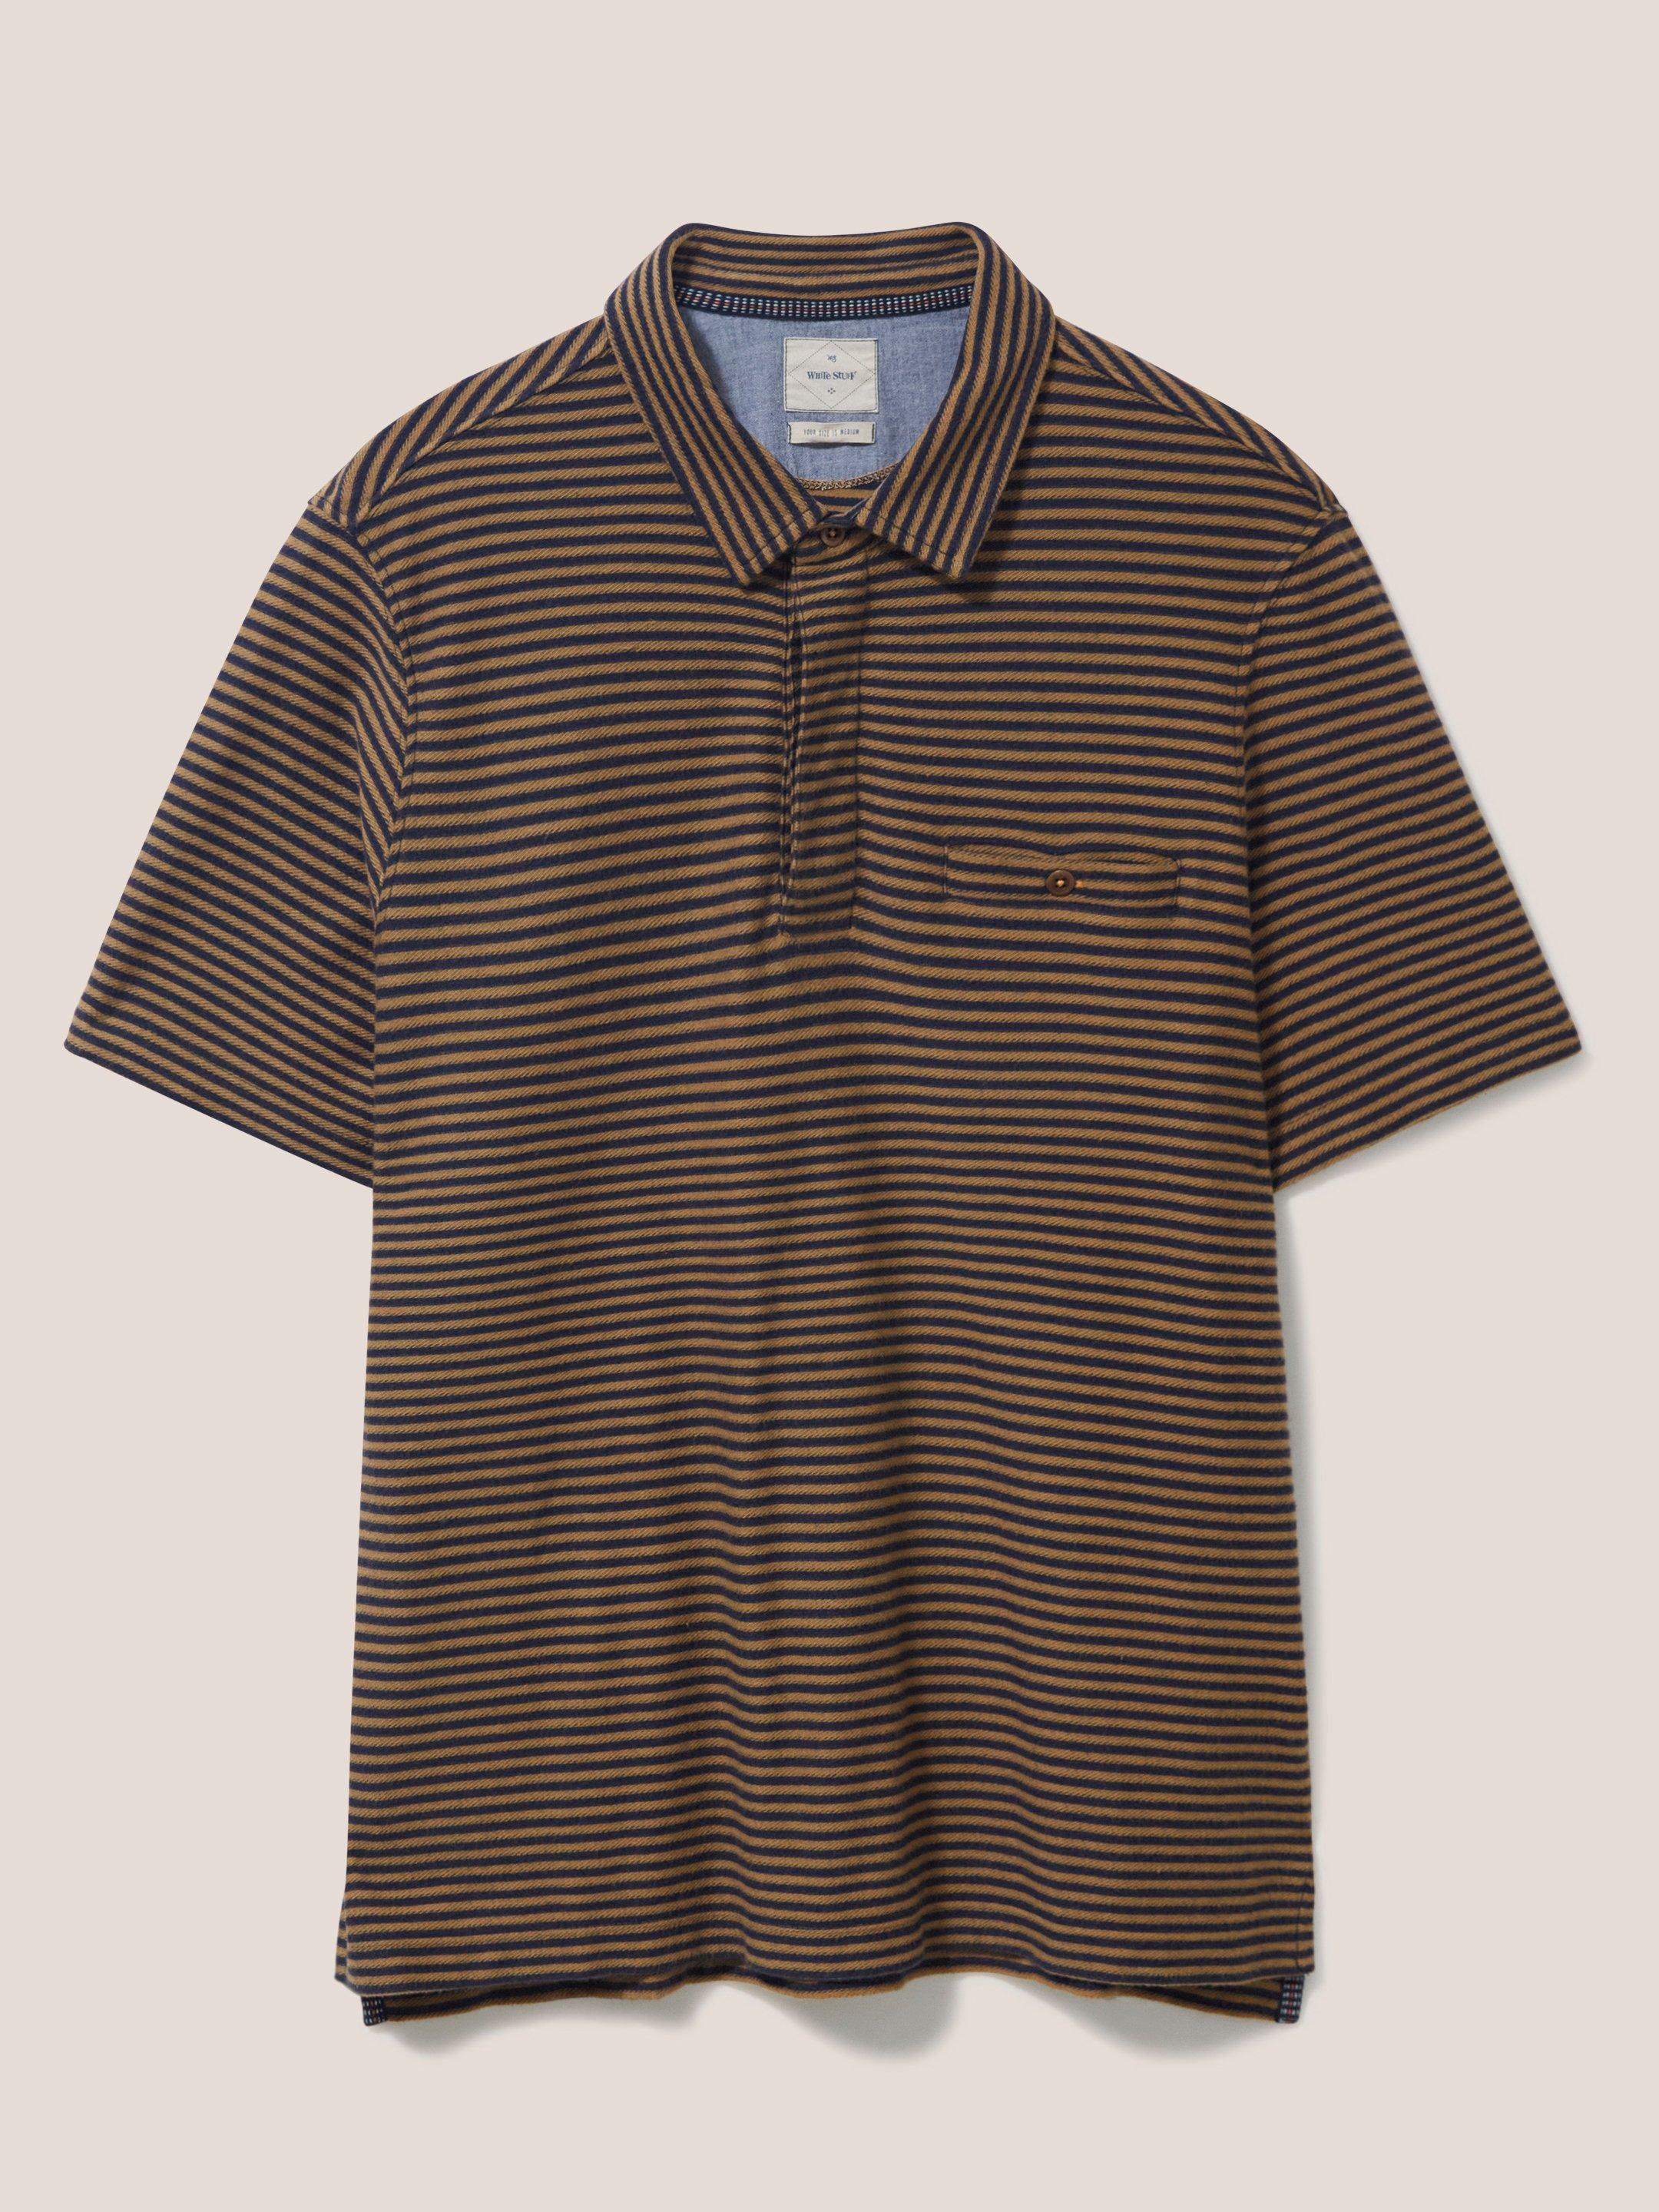 Burston Striped SS Polo in MID BROWN - FLAT FRONT